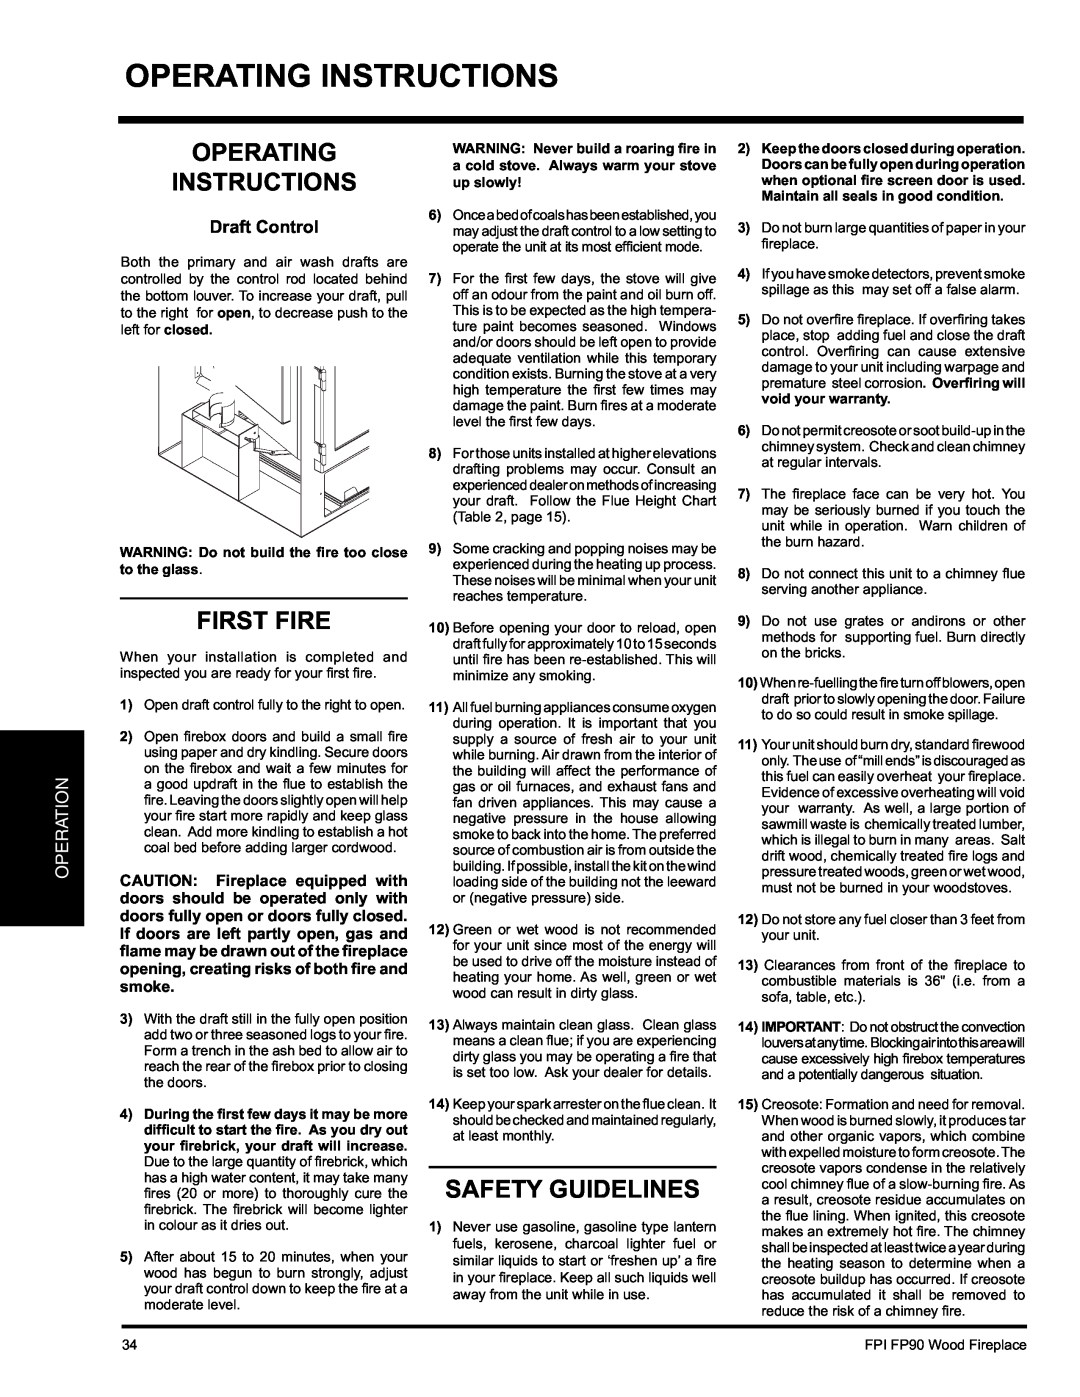 Regency FP90 installation manual Operating Instructions, First Fire, Safety Guidelines, Operation, Draft Control 